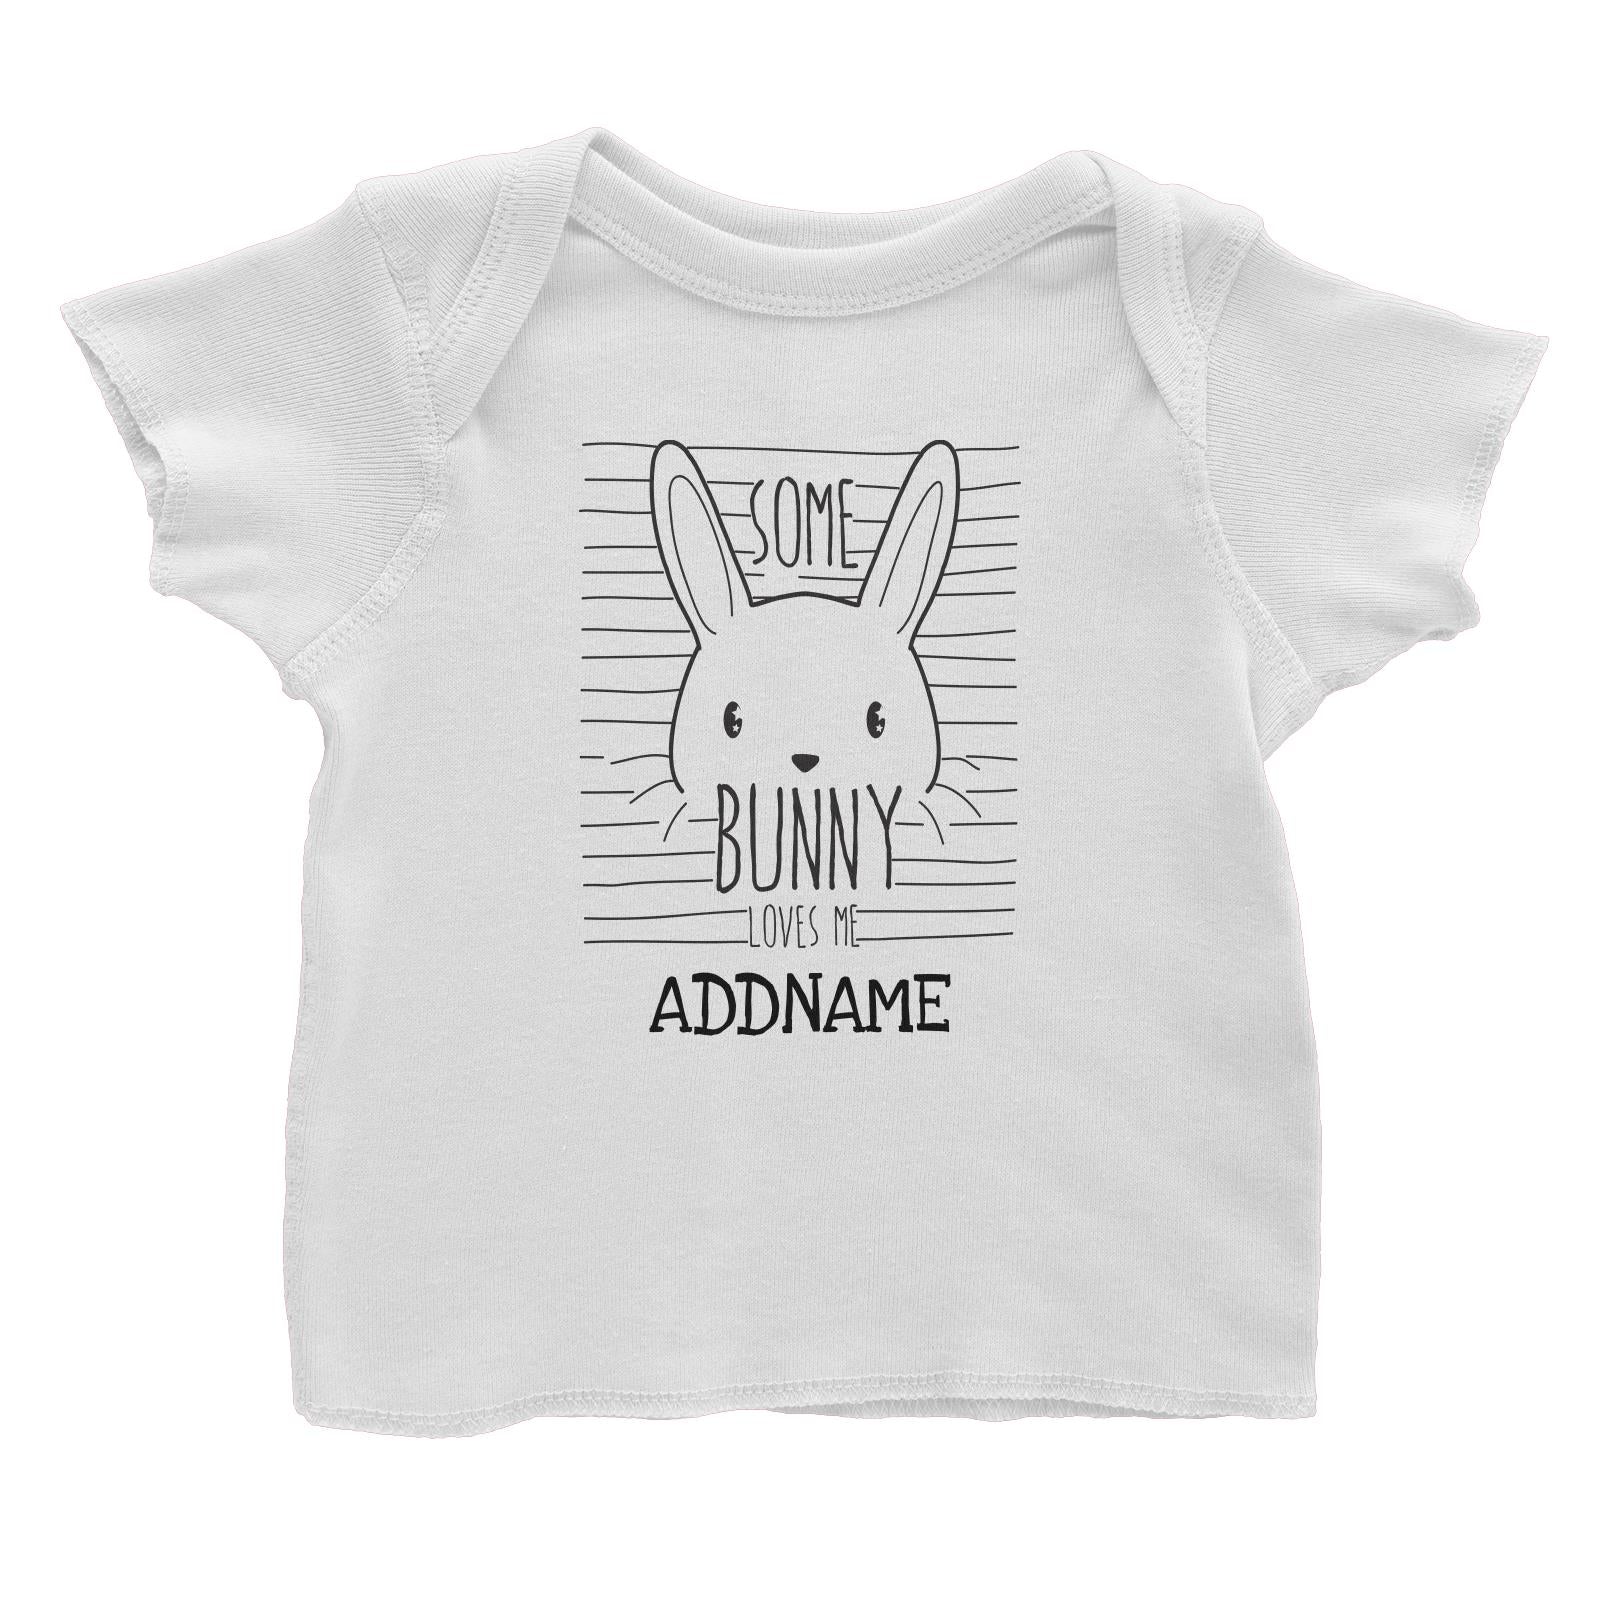 Some Bunny Loves Me Addname White Baby T-Shirt